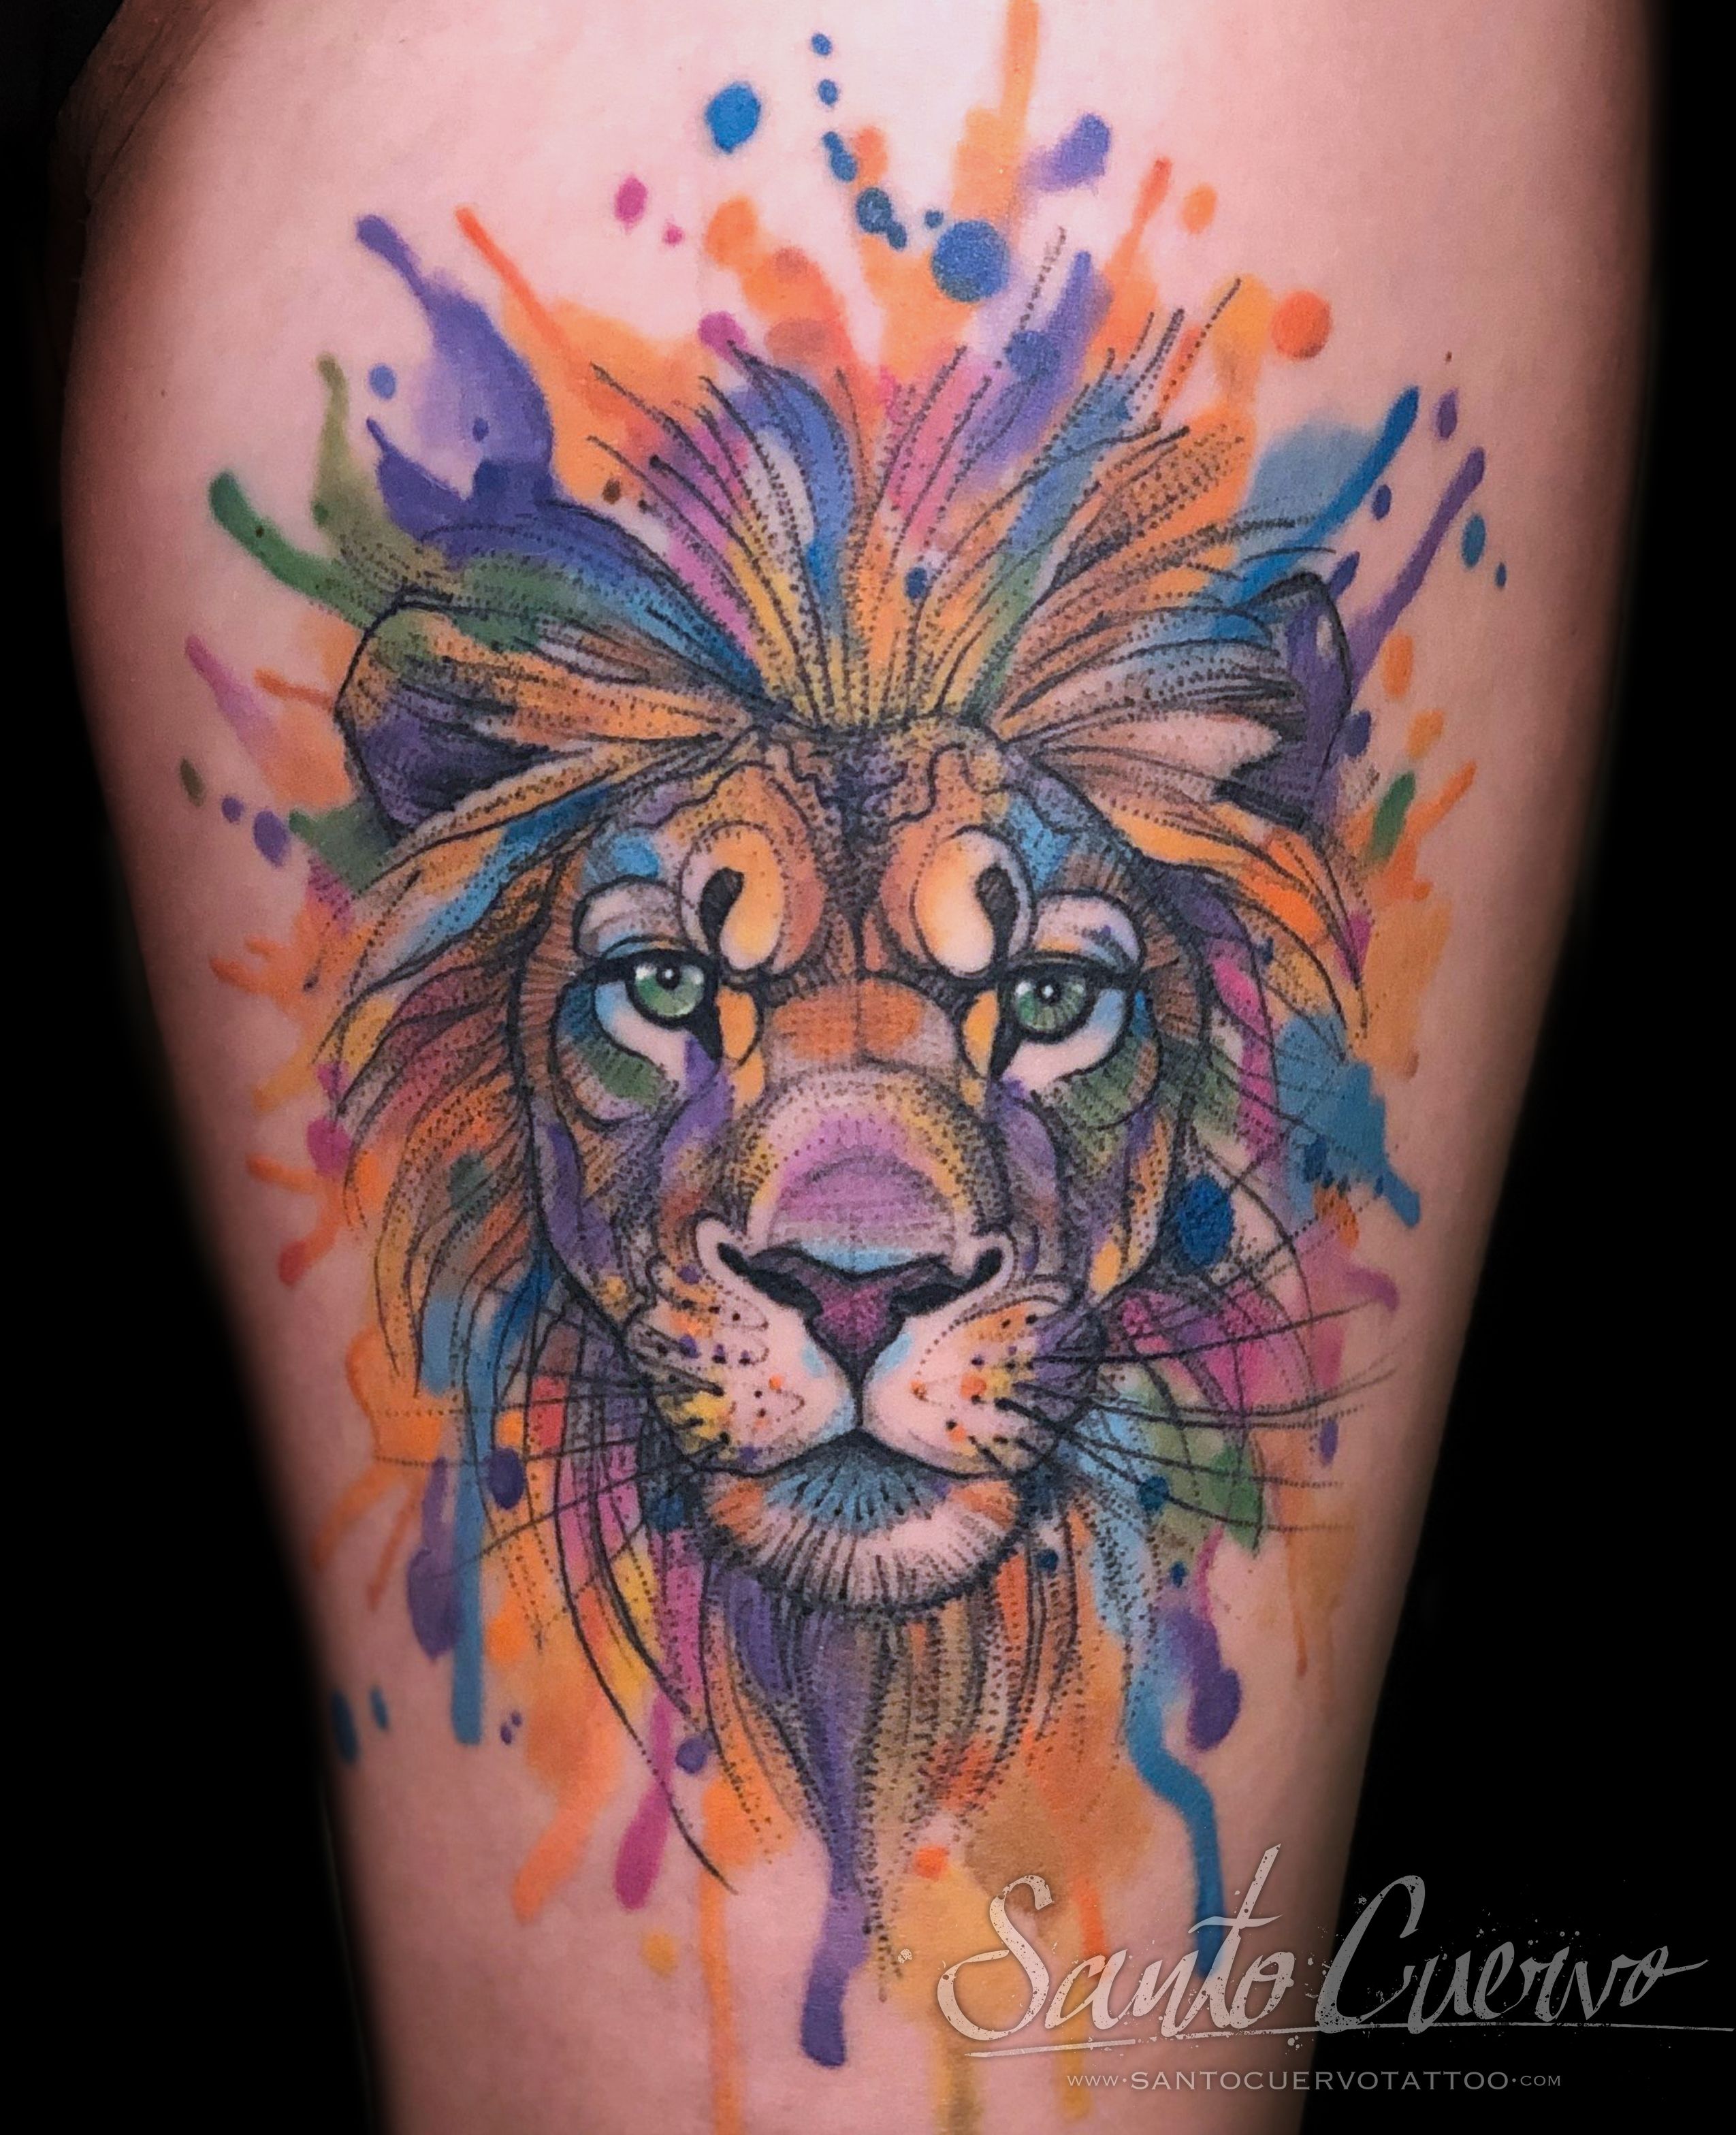 Salvation Tattoo Studios - A beautiful and majestic Native American  inspired lion tattoo by Stefan 🦁 | Facebook